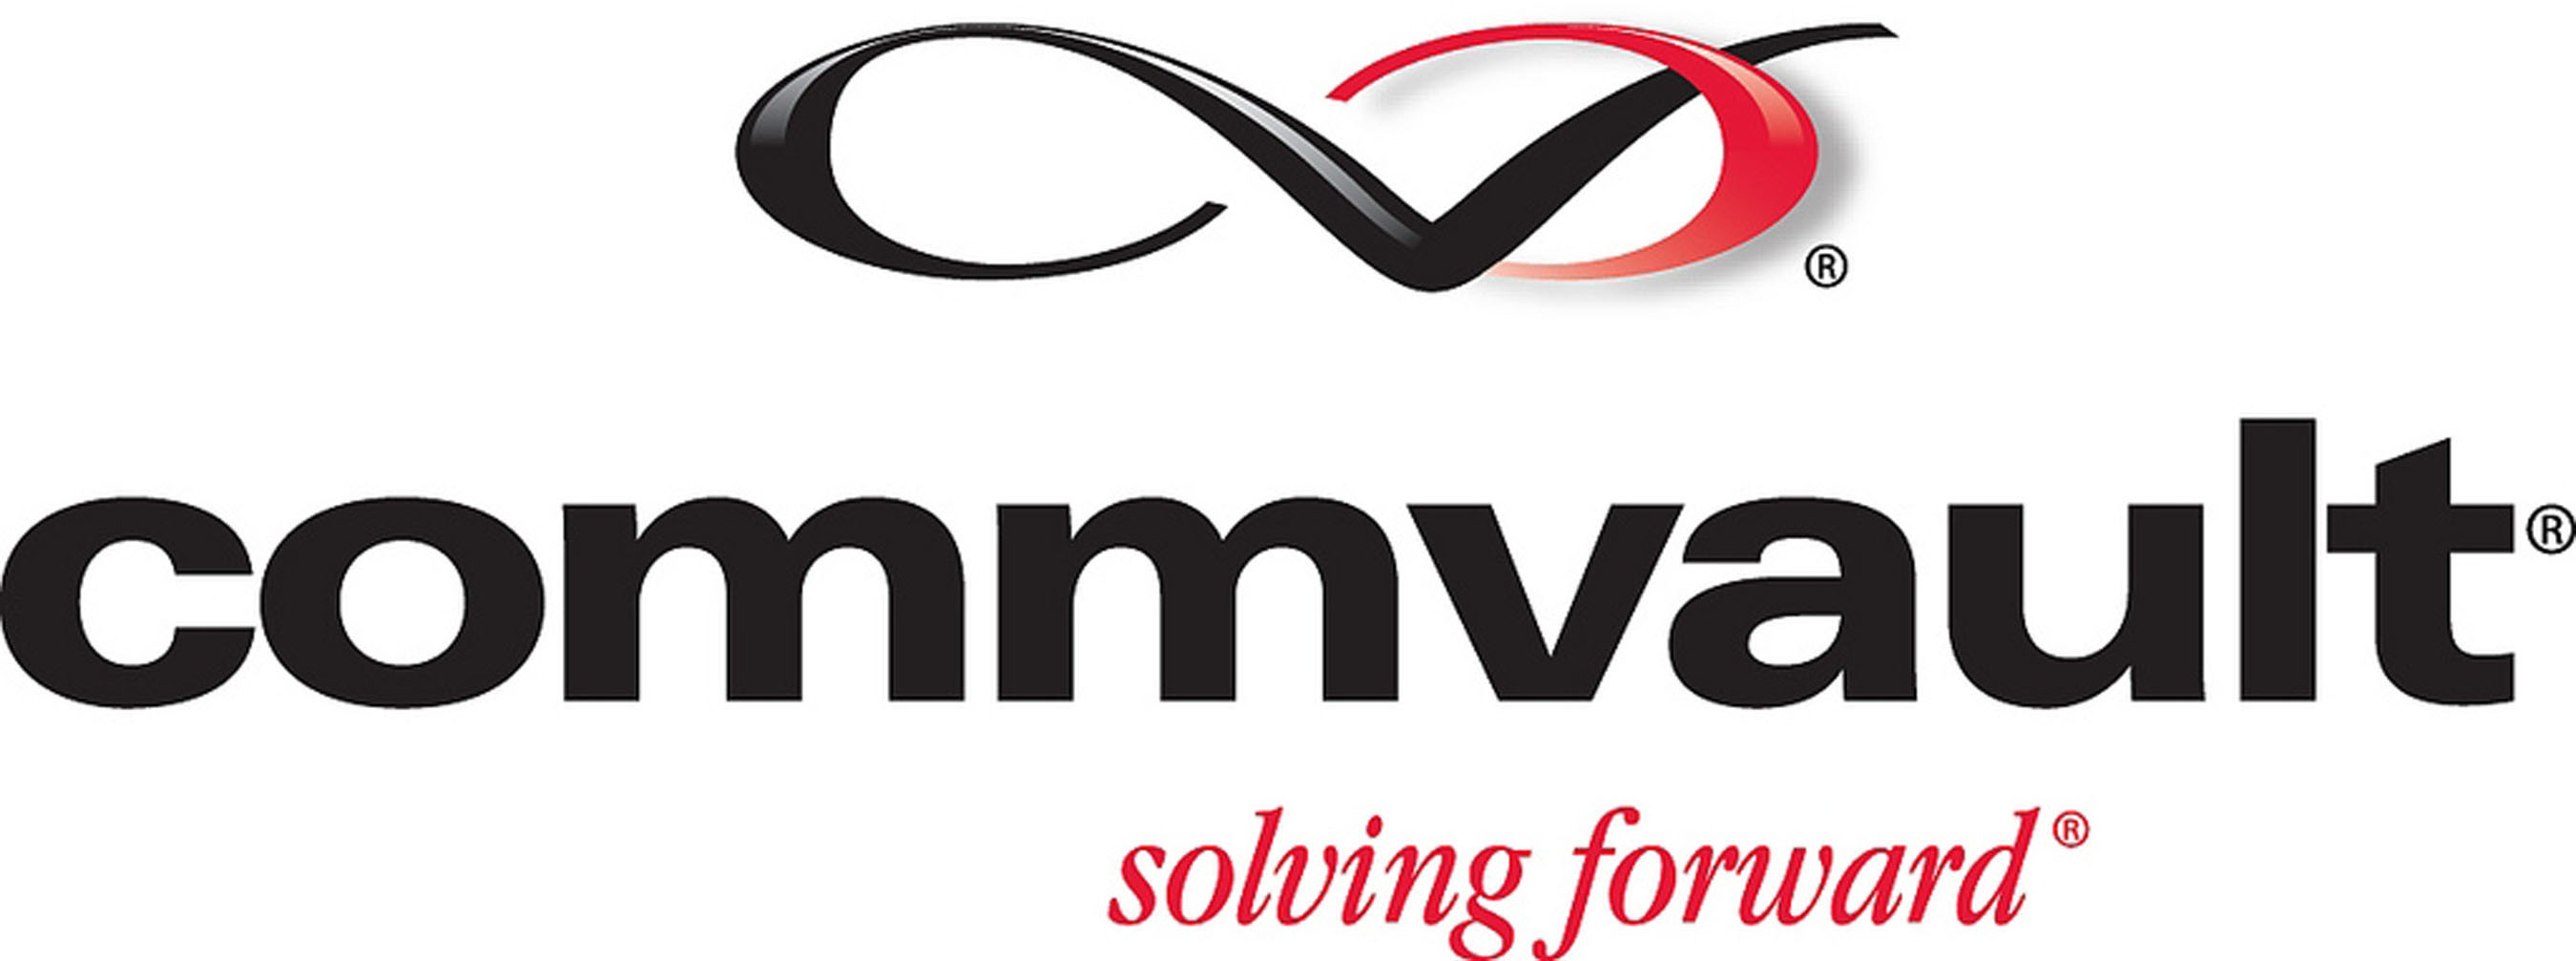 CommVault the leader in modern data and information management software.